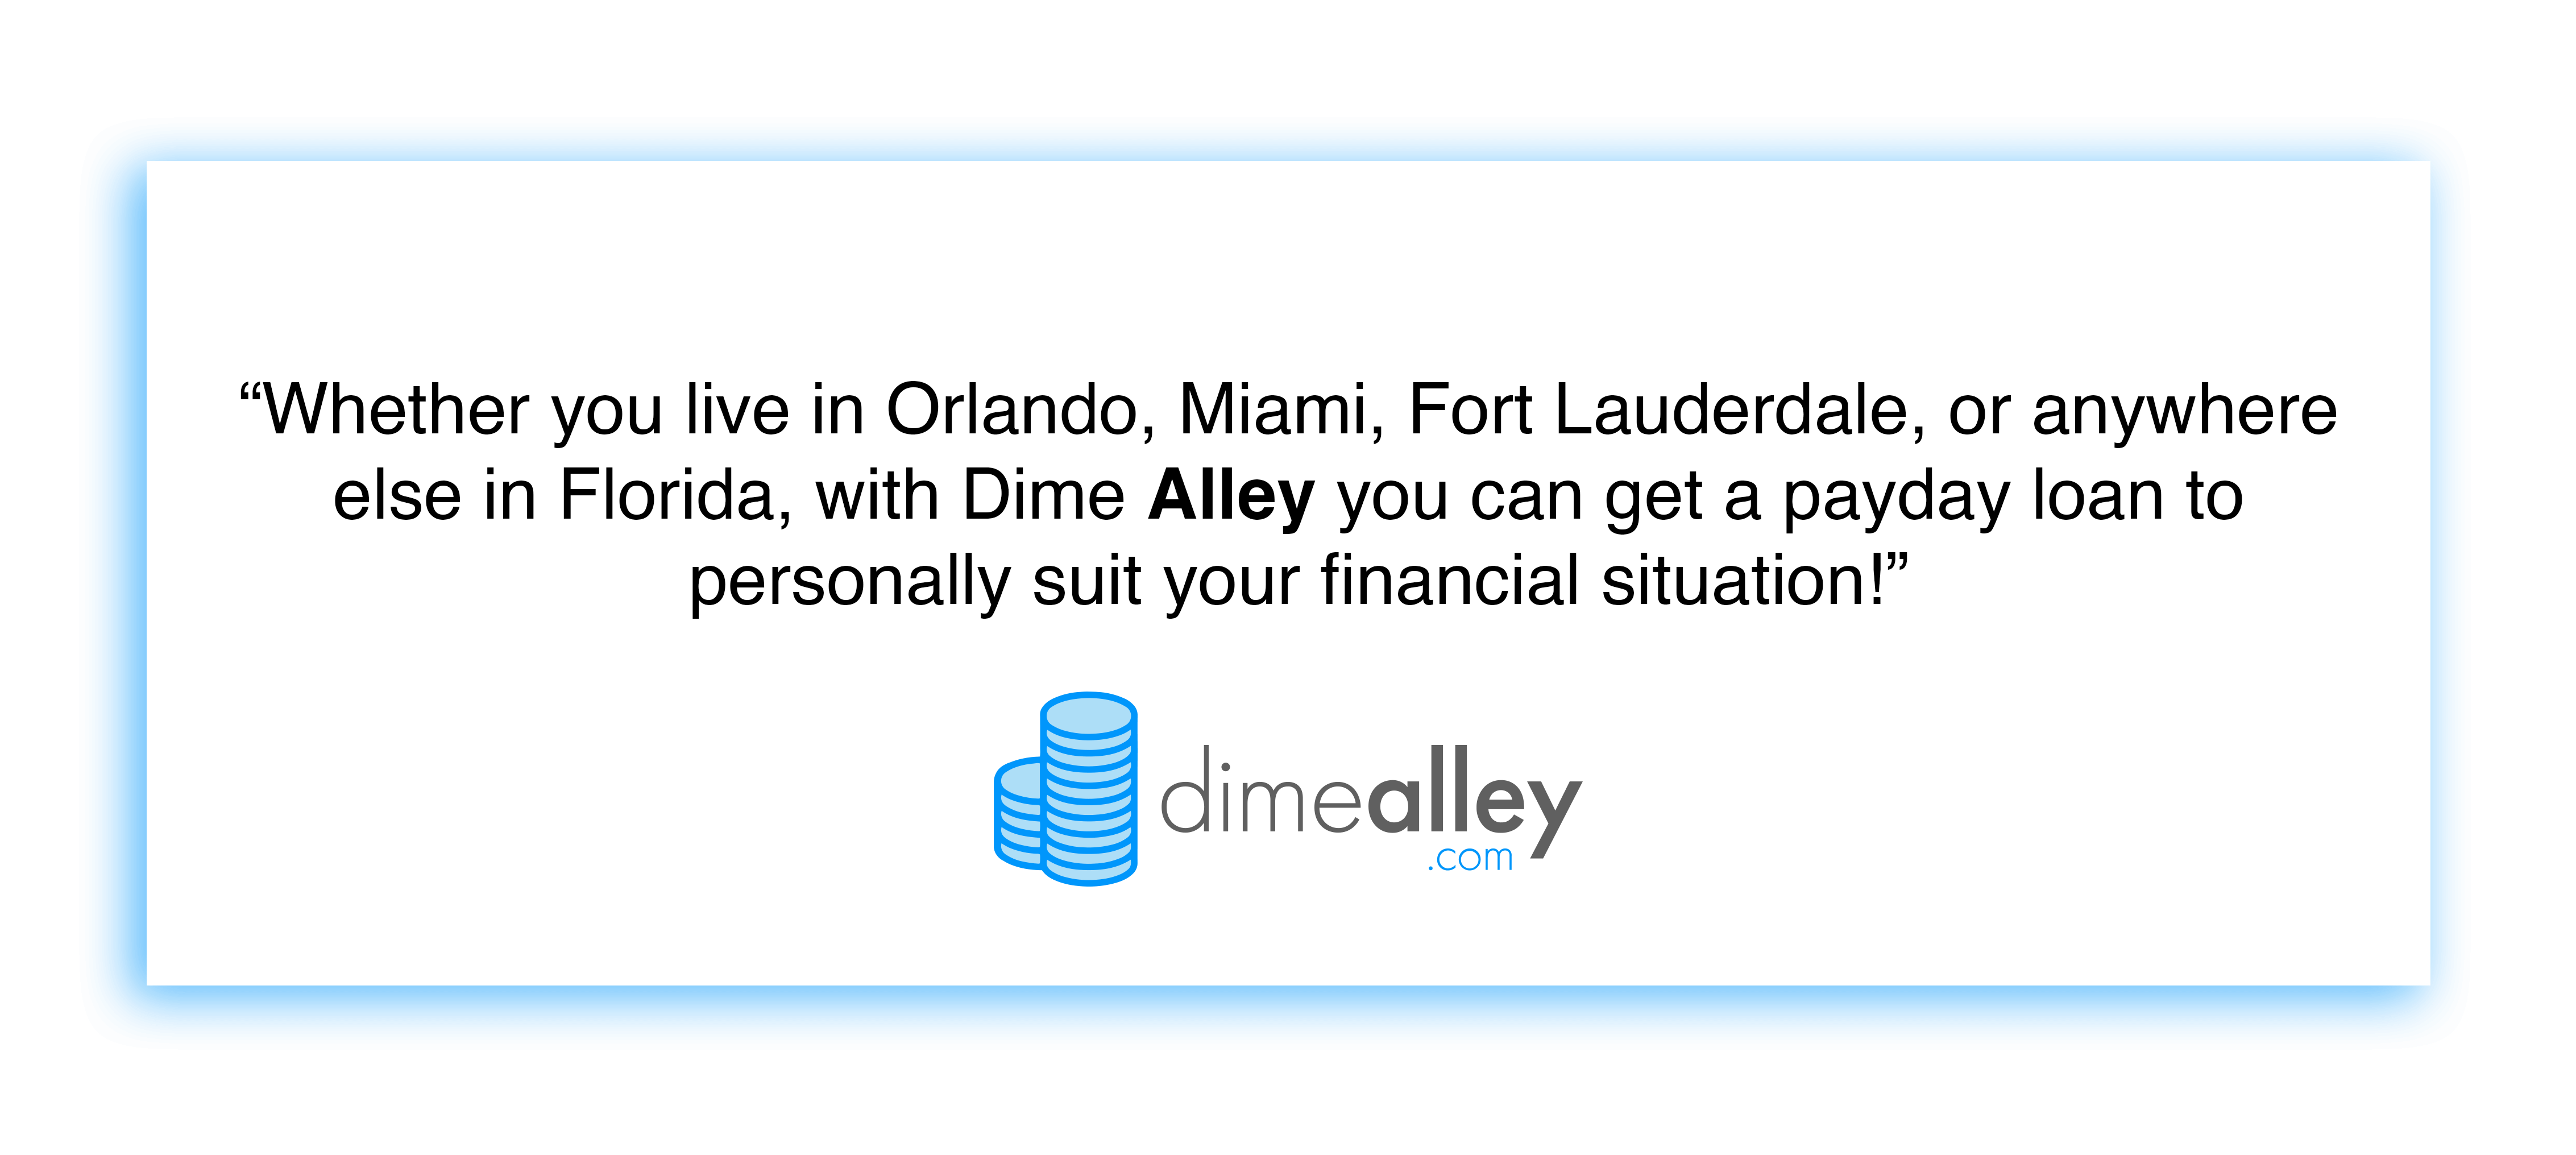 Payday-loans-in-Florida